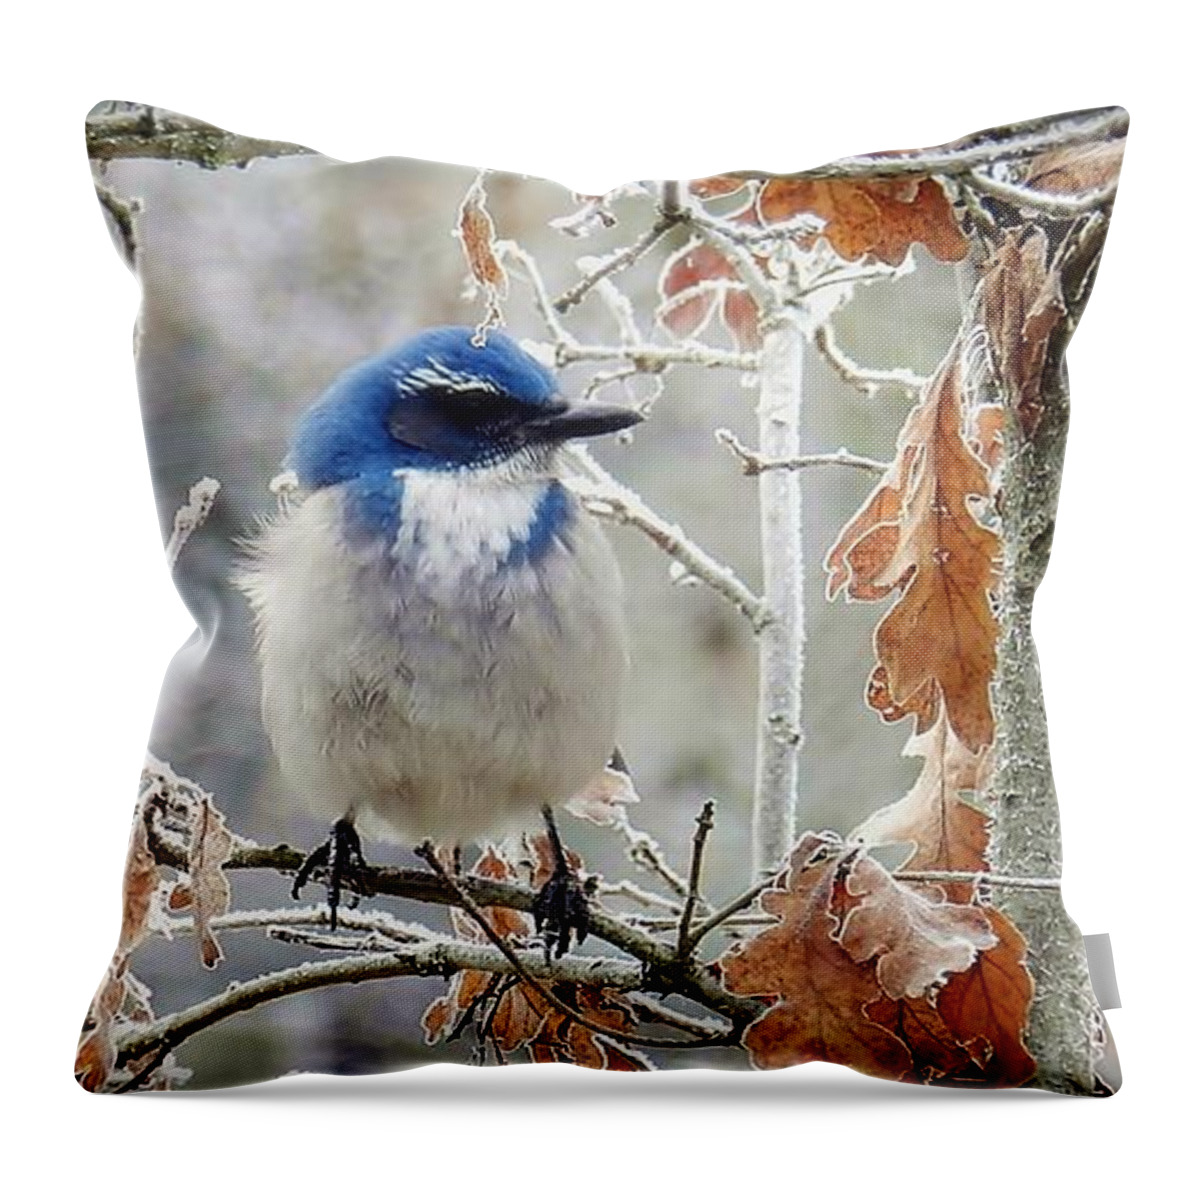 Birds Throw Pillow featuring the photograph Where's The Heater by Julia Hassett